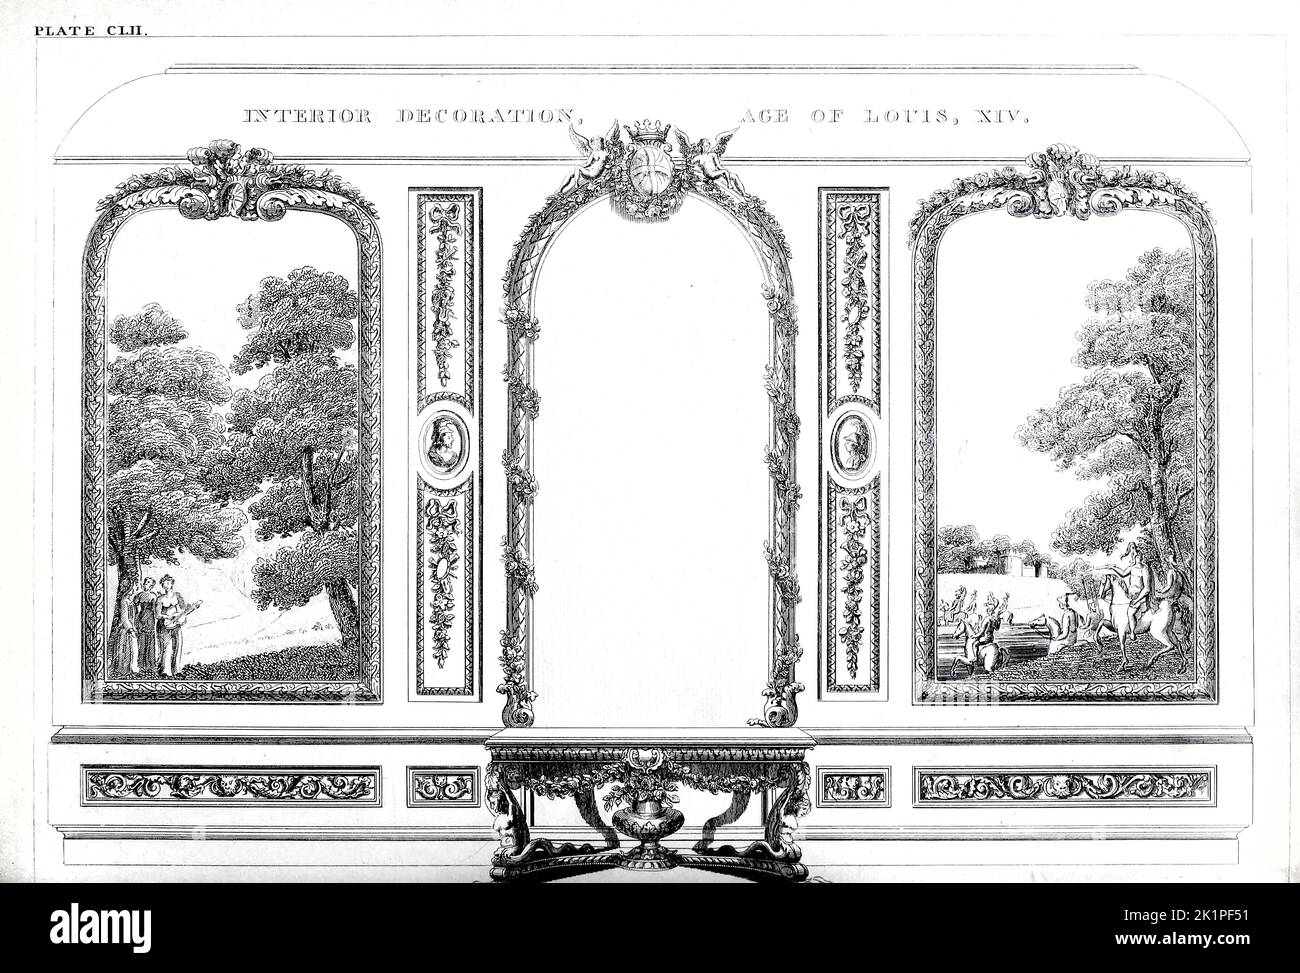 Interior Decoration Age of Louis XIV from the The cabinet-maker and upholsterer's guide : being a complete drawing book, in which will be comprised treatises on geometry and perspective as applicable to the above branches of mechanics illustrated by numerous engravings of new and original designs for household furniture, and interior decoration beautifully and correctly coloured By Smith, George, 1808-1899 Publication date 1826 Publisher London : Jones and Co. Stock Photo